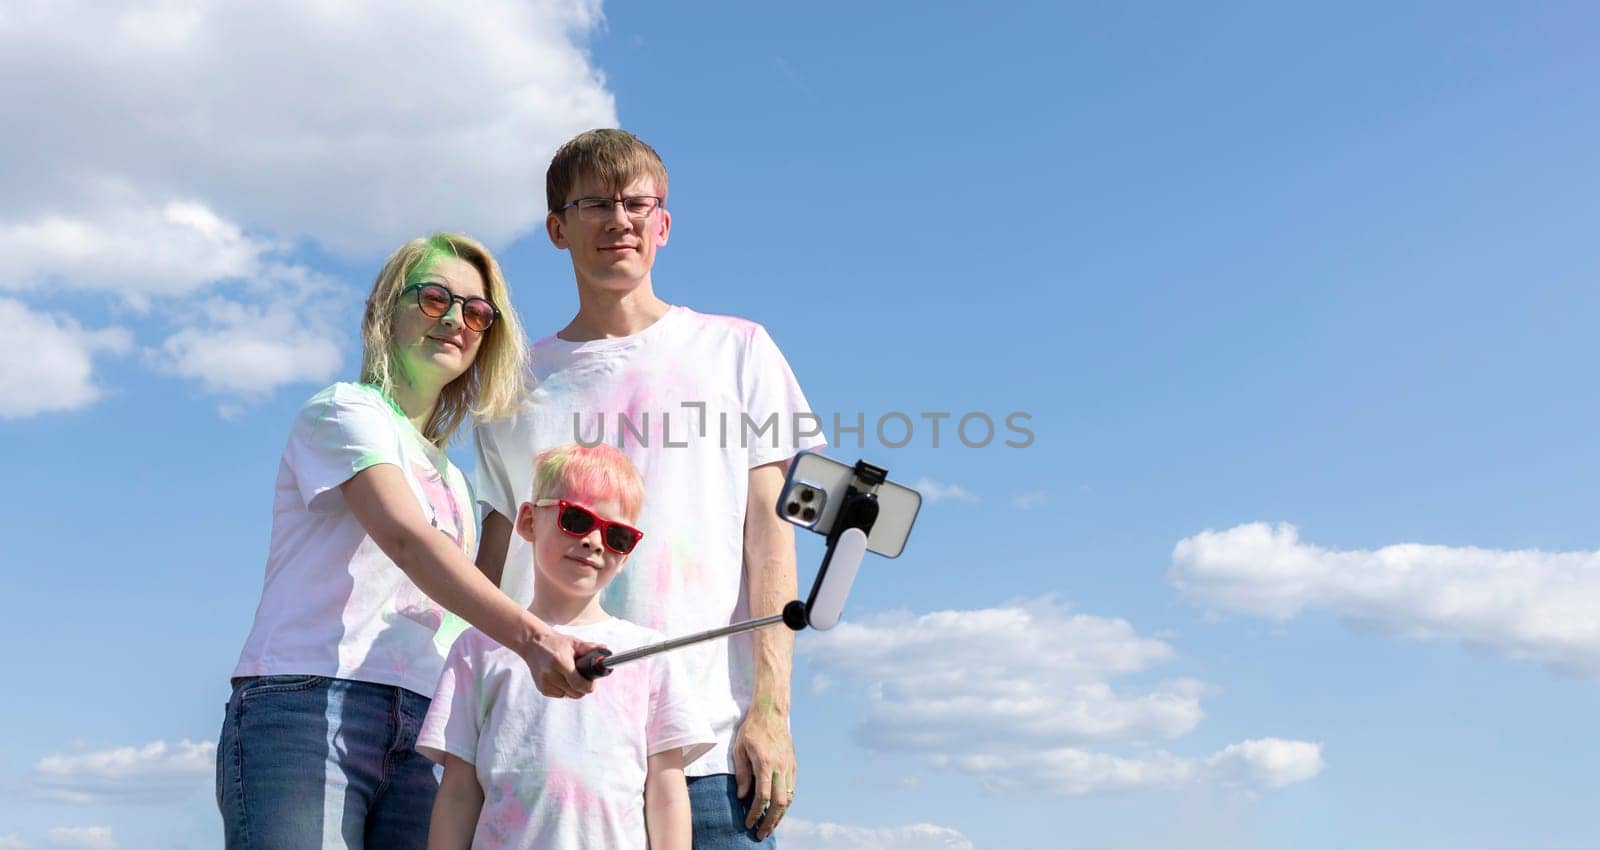 Caucasian Family Takes Selfie. Parent And Child With Colorful Dye At Birthday Party Or Celebrating Holi Color Festival, Blue Sky On background. Cheerful Family Spend Time Together. Horizontal Plane.